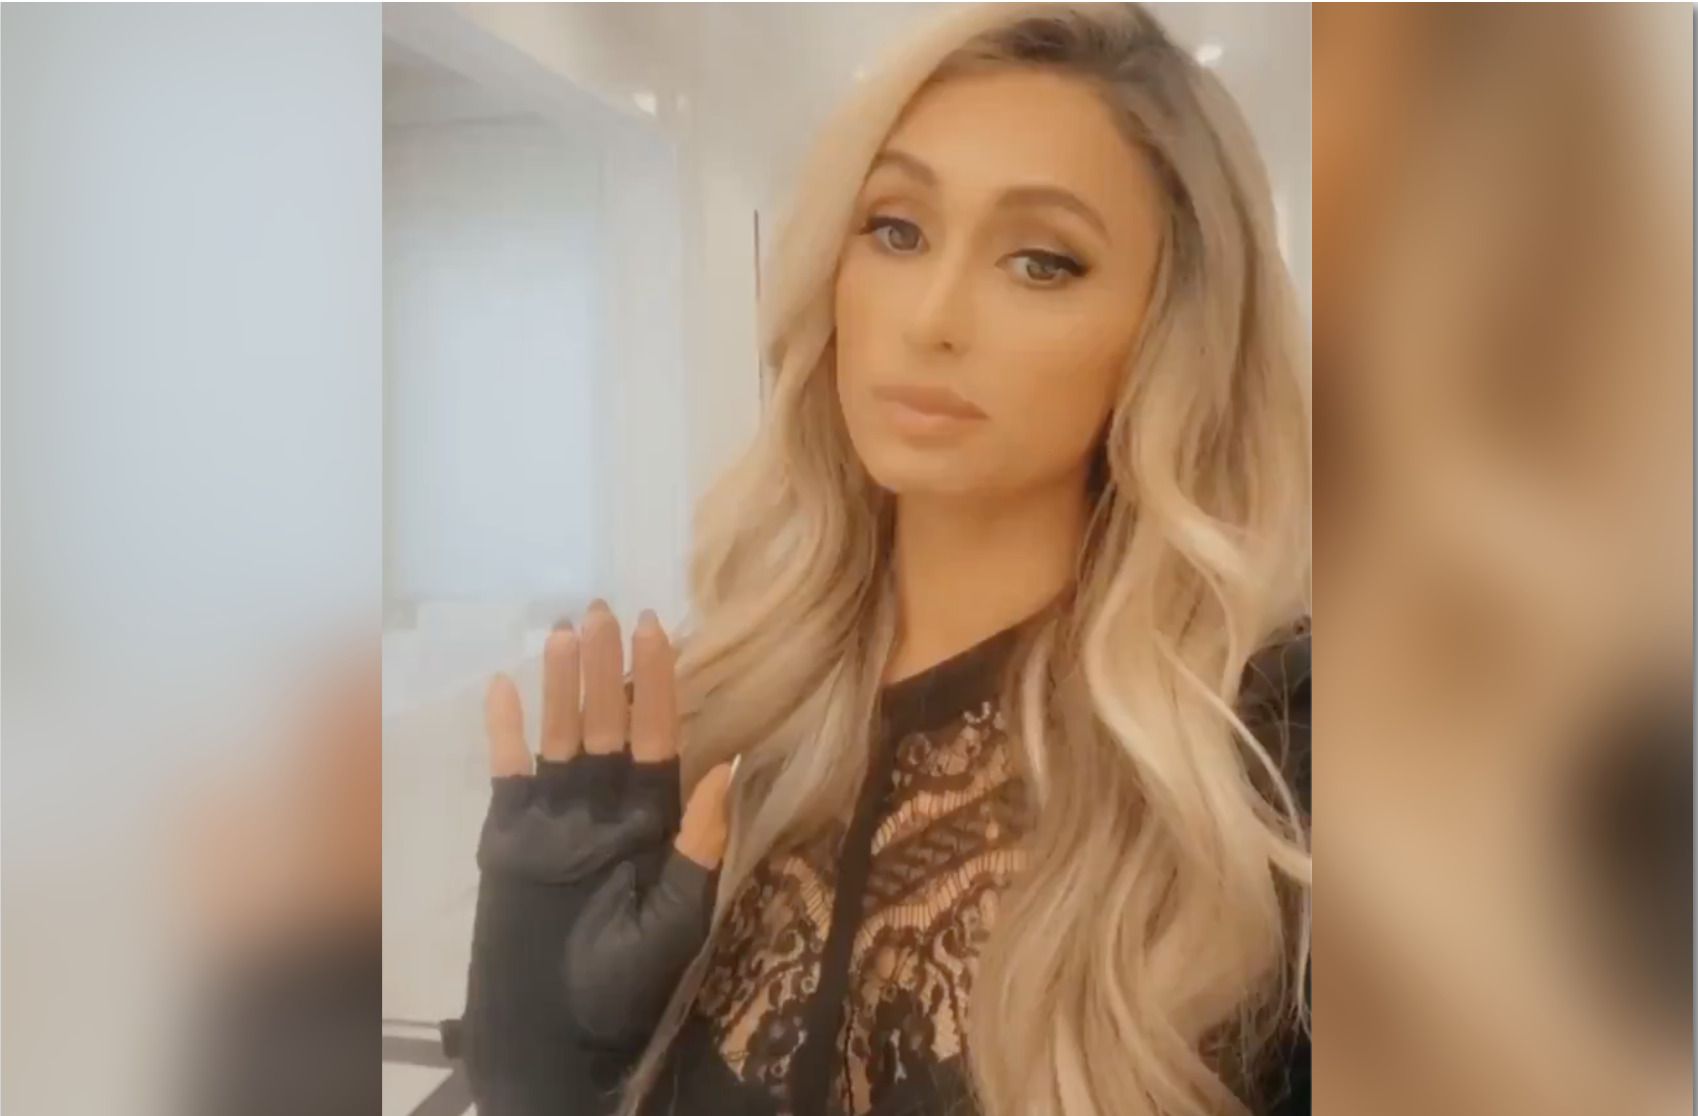 Paris Hilton EXPOSES Her Child Abuse and MKUltra [Warning: Graphic Content]